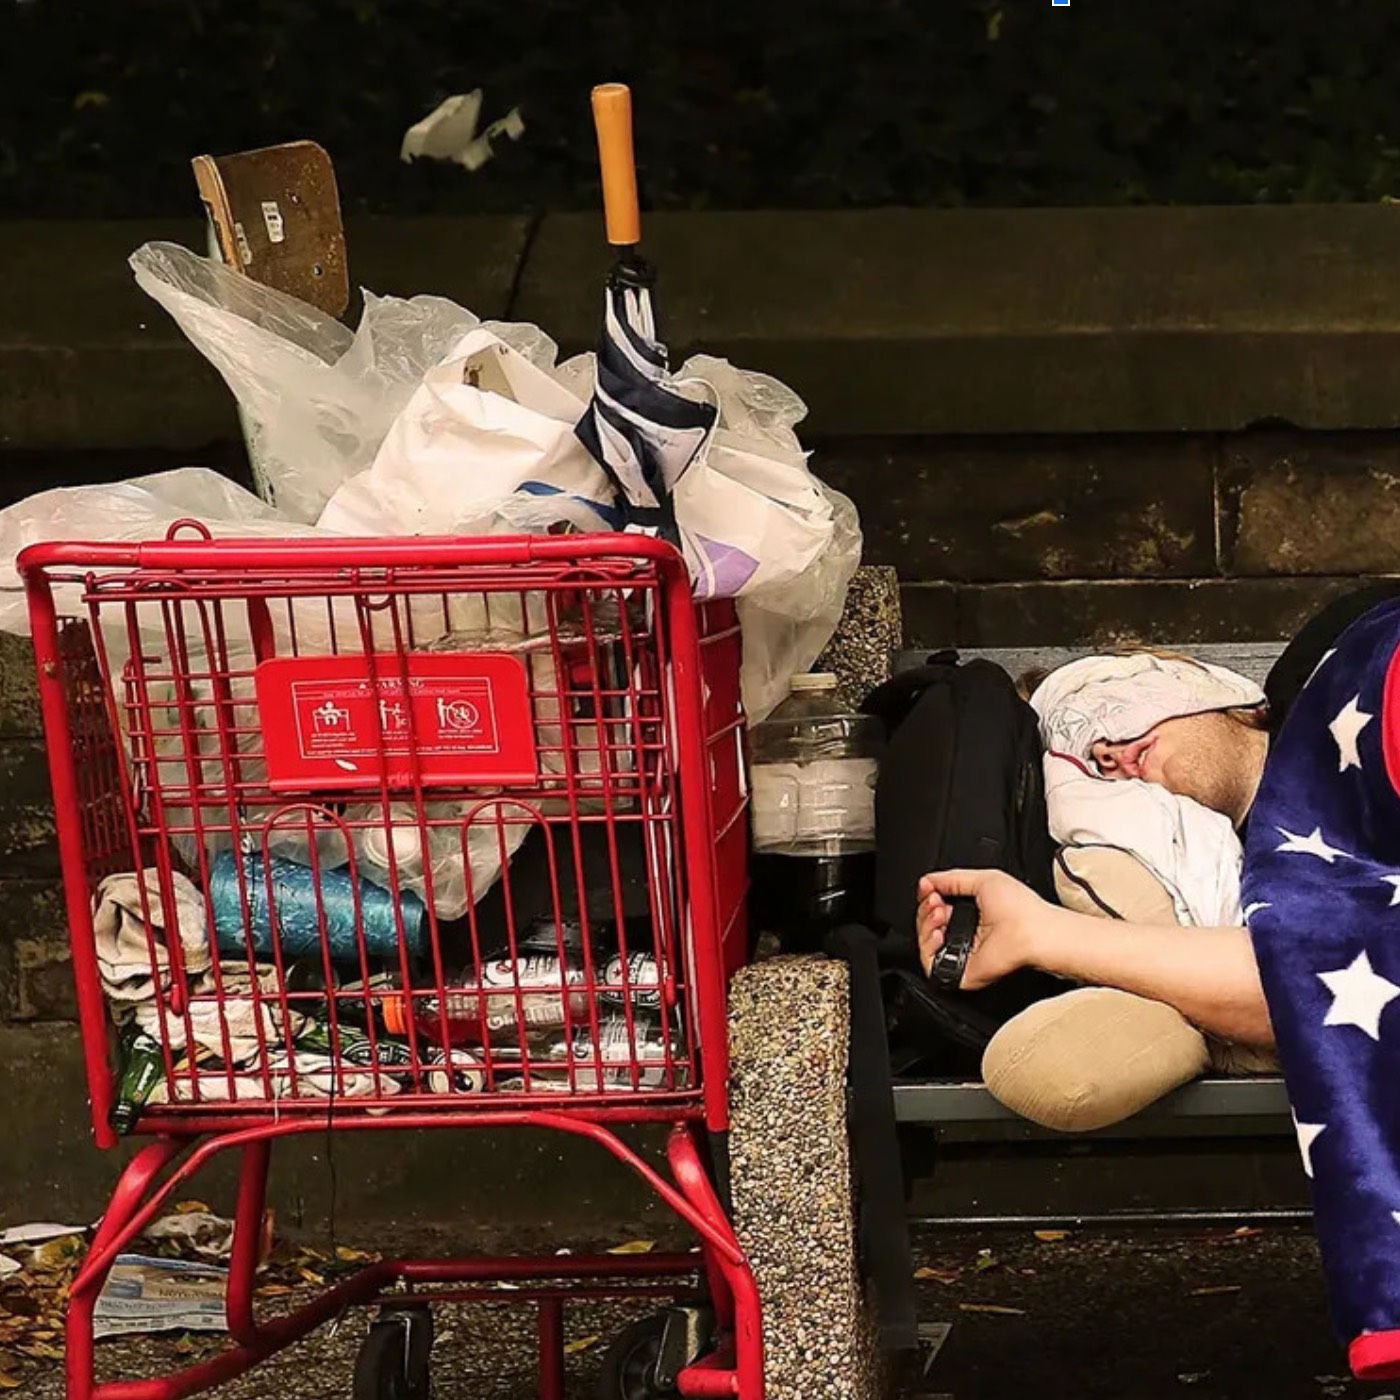 unhoused person with shopping cart